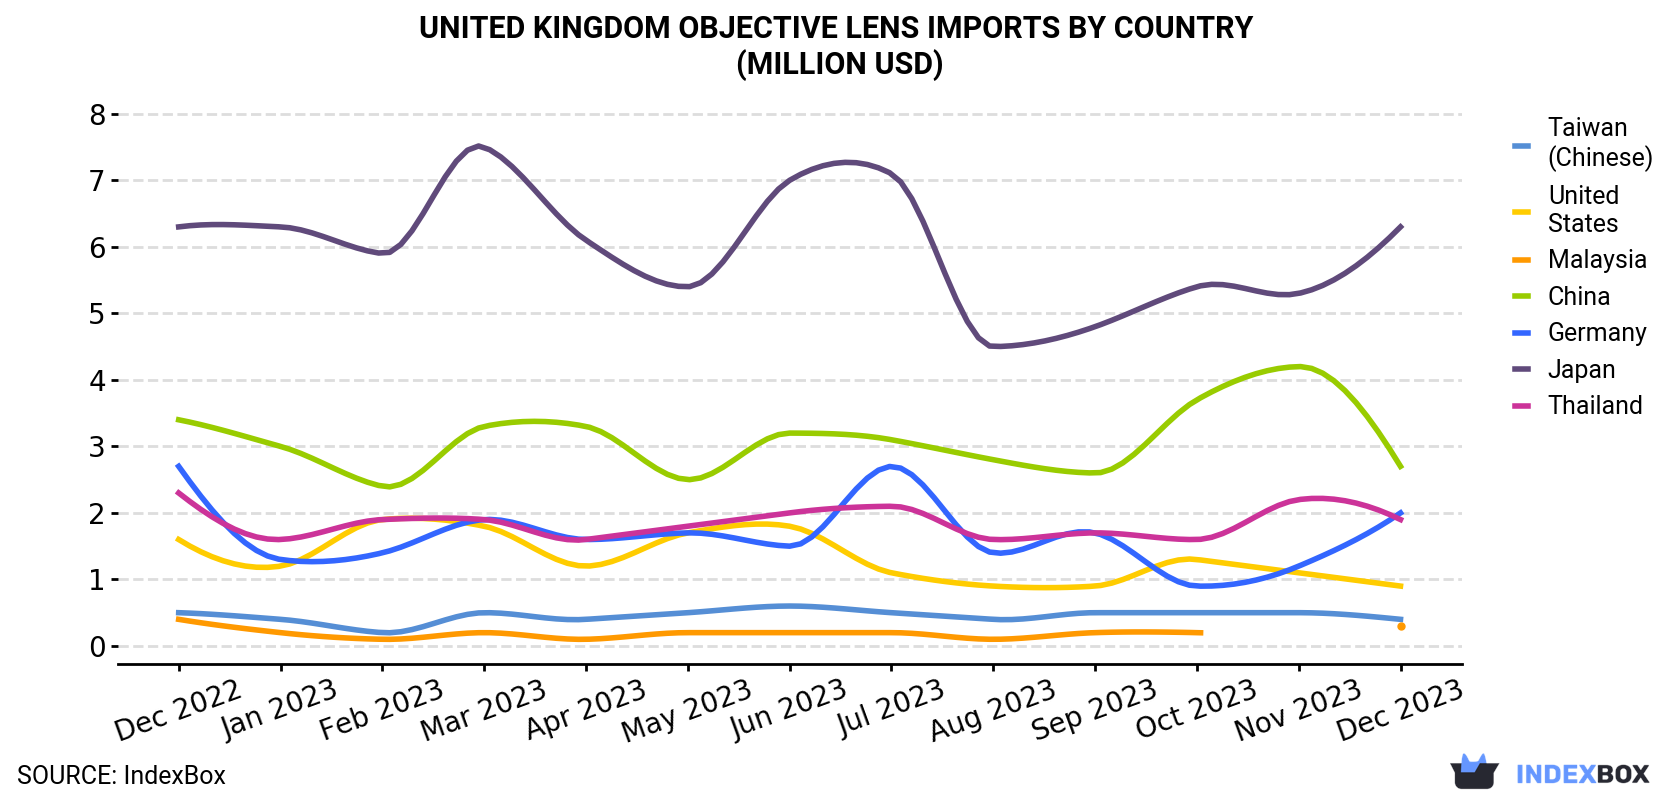 United Kingdom Objective Lens Imports By Country (Million USD)